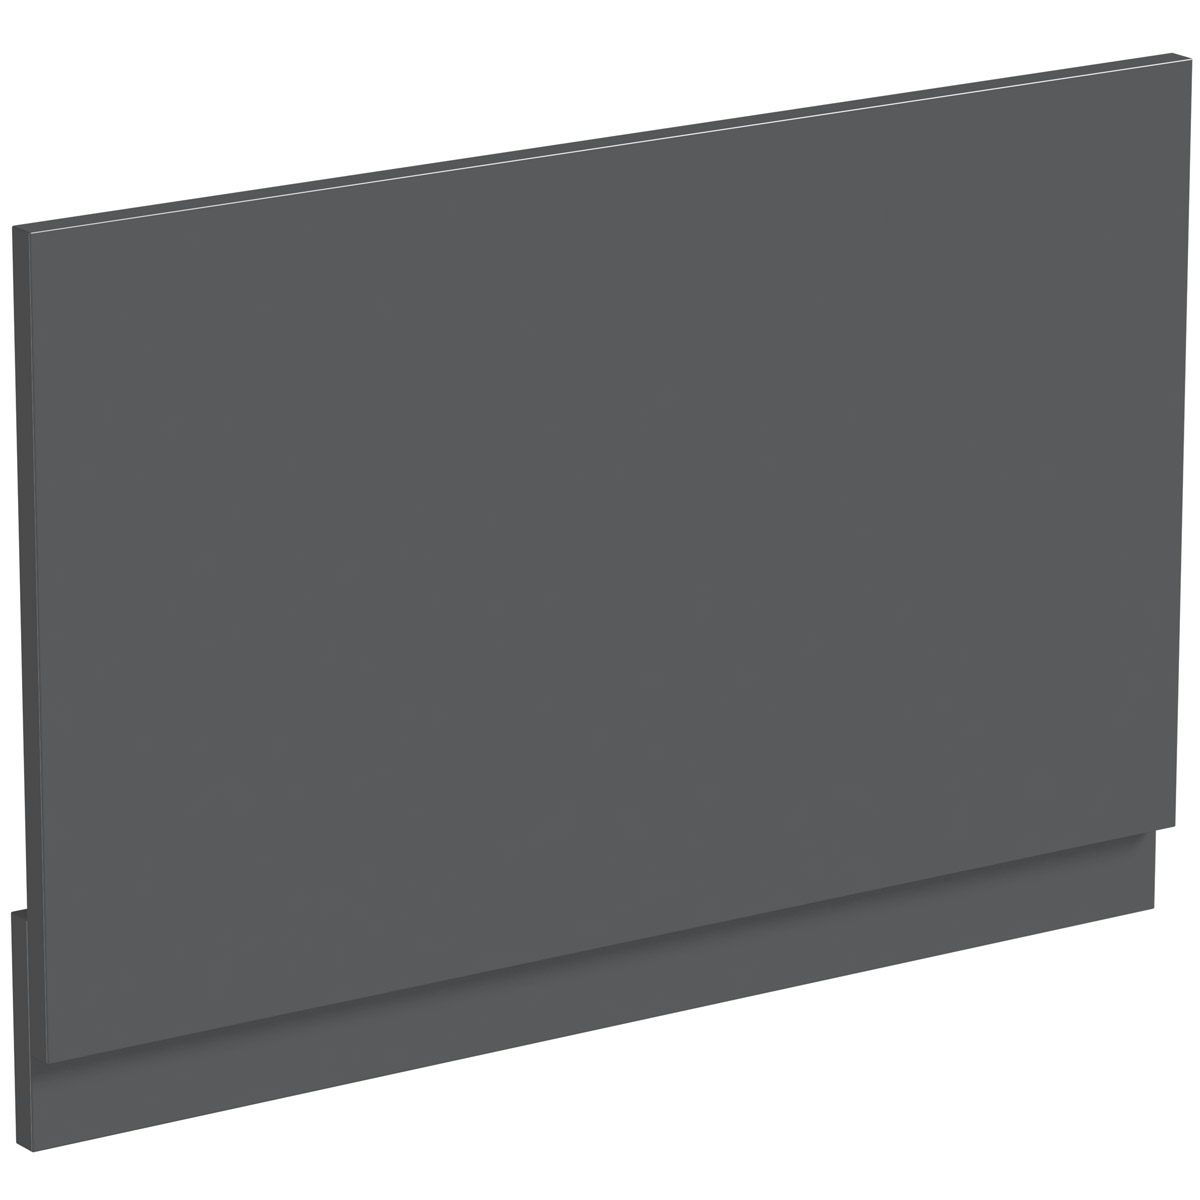 Reeves Nouvel gloss grey bath end panel 680mm